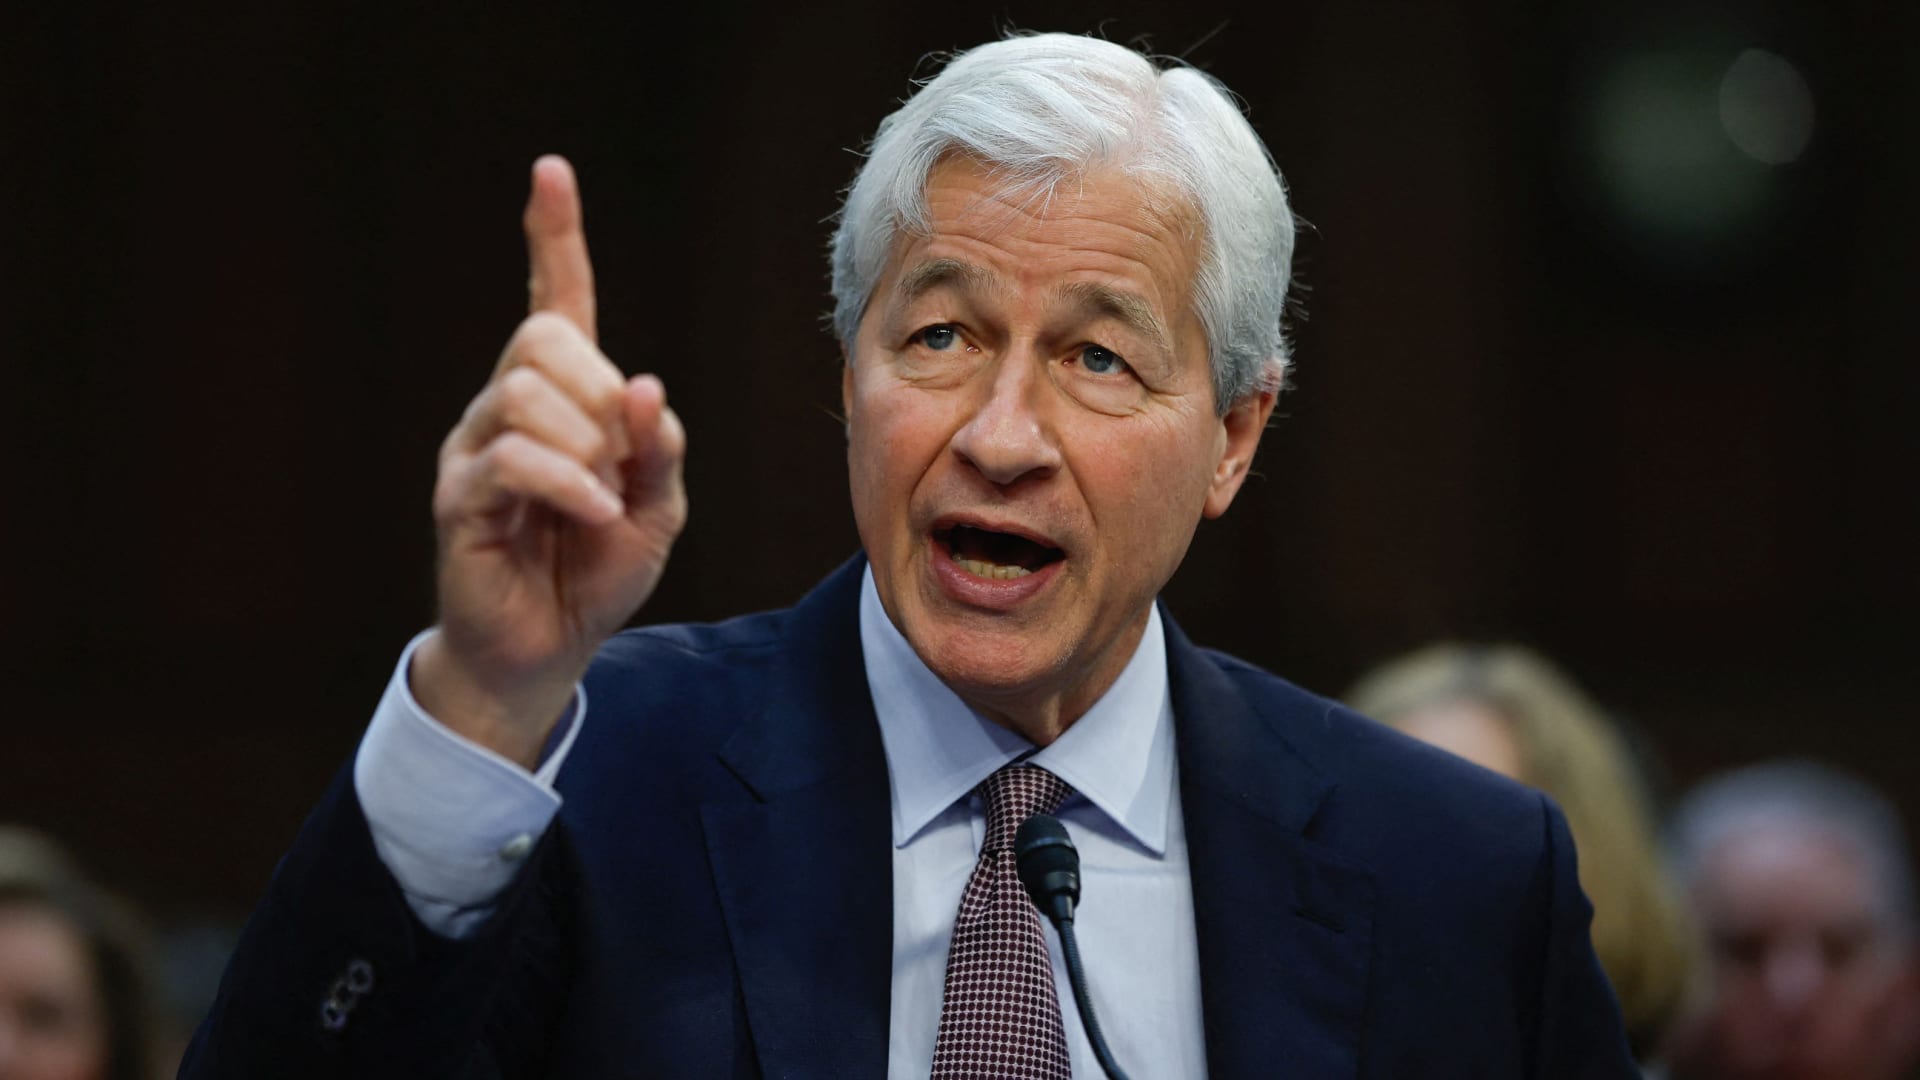 Jamie Dimon lashes out against crypto: 'If I was the government, I'd close it down'